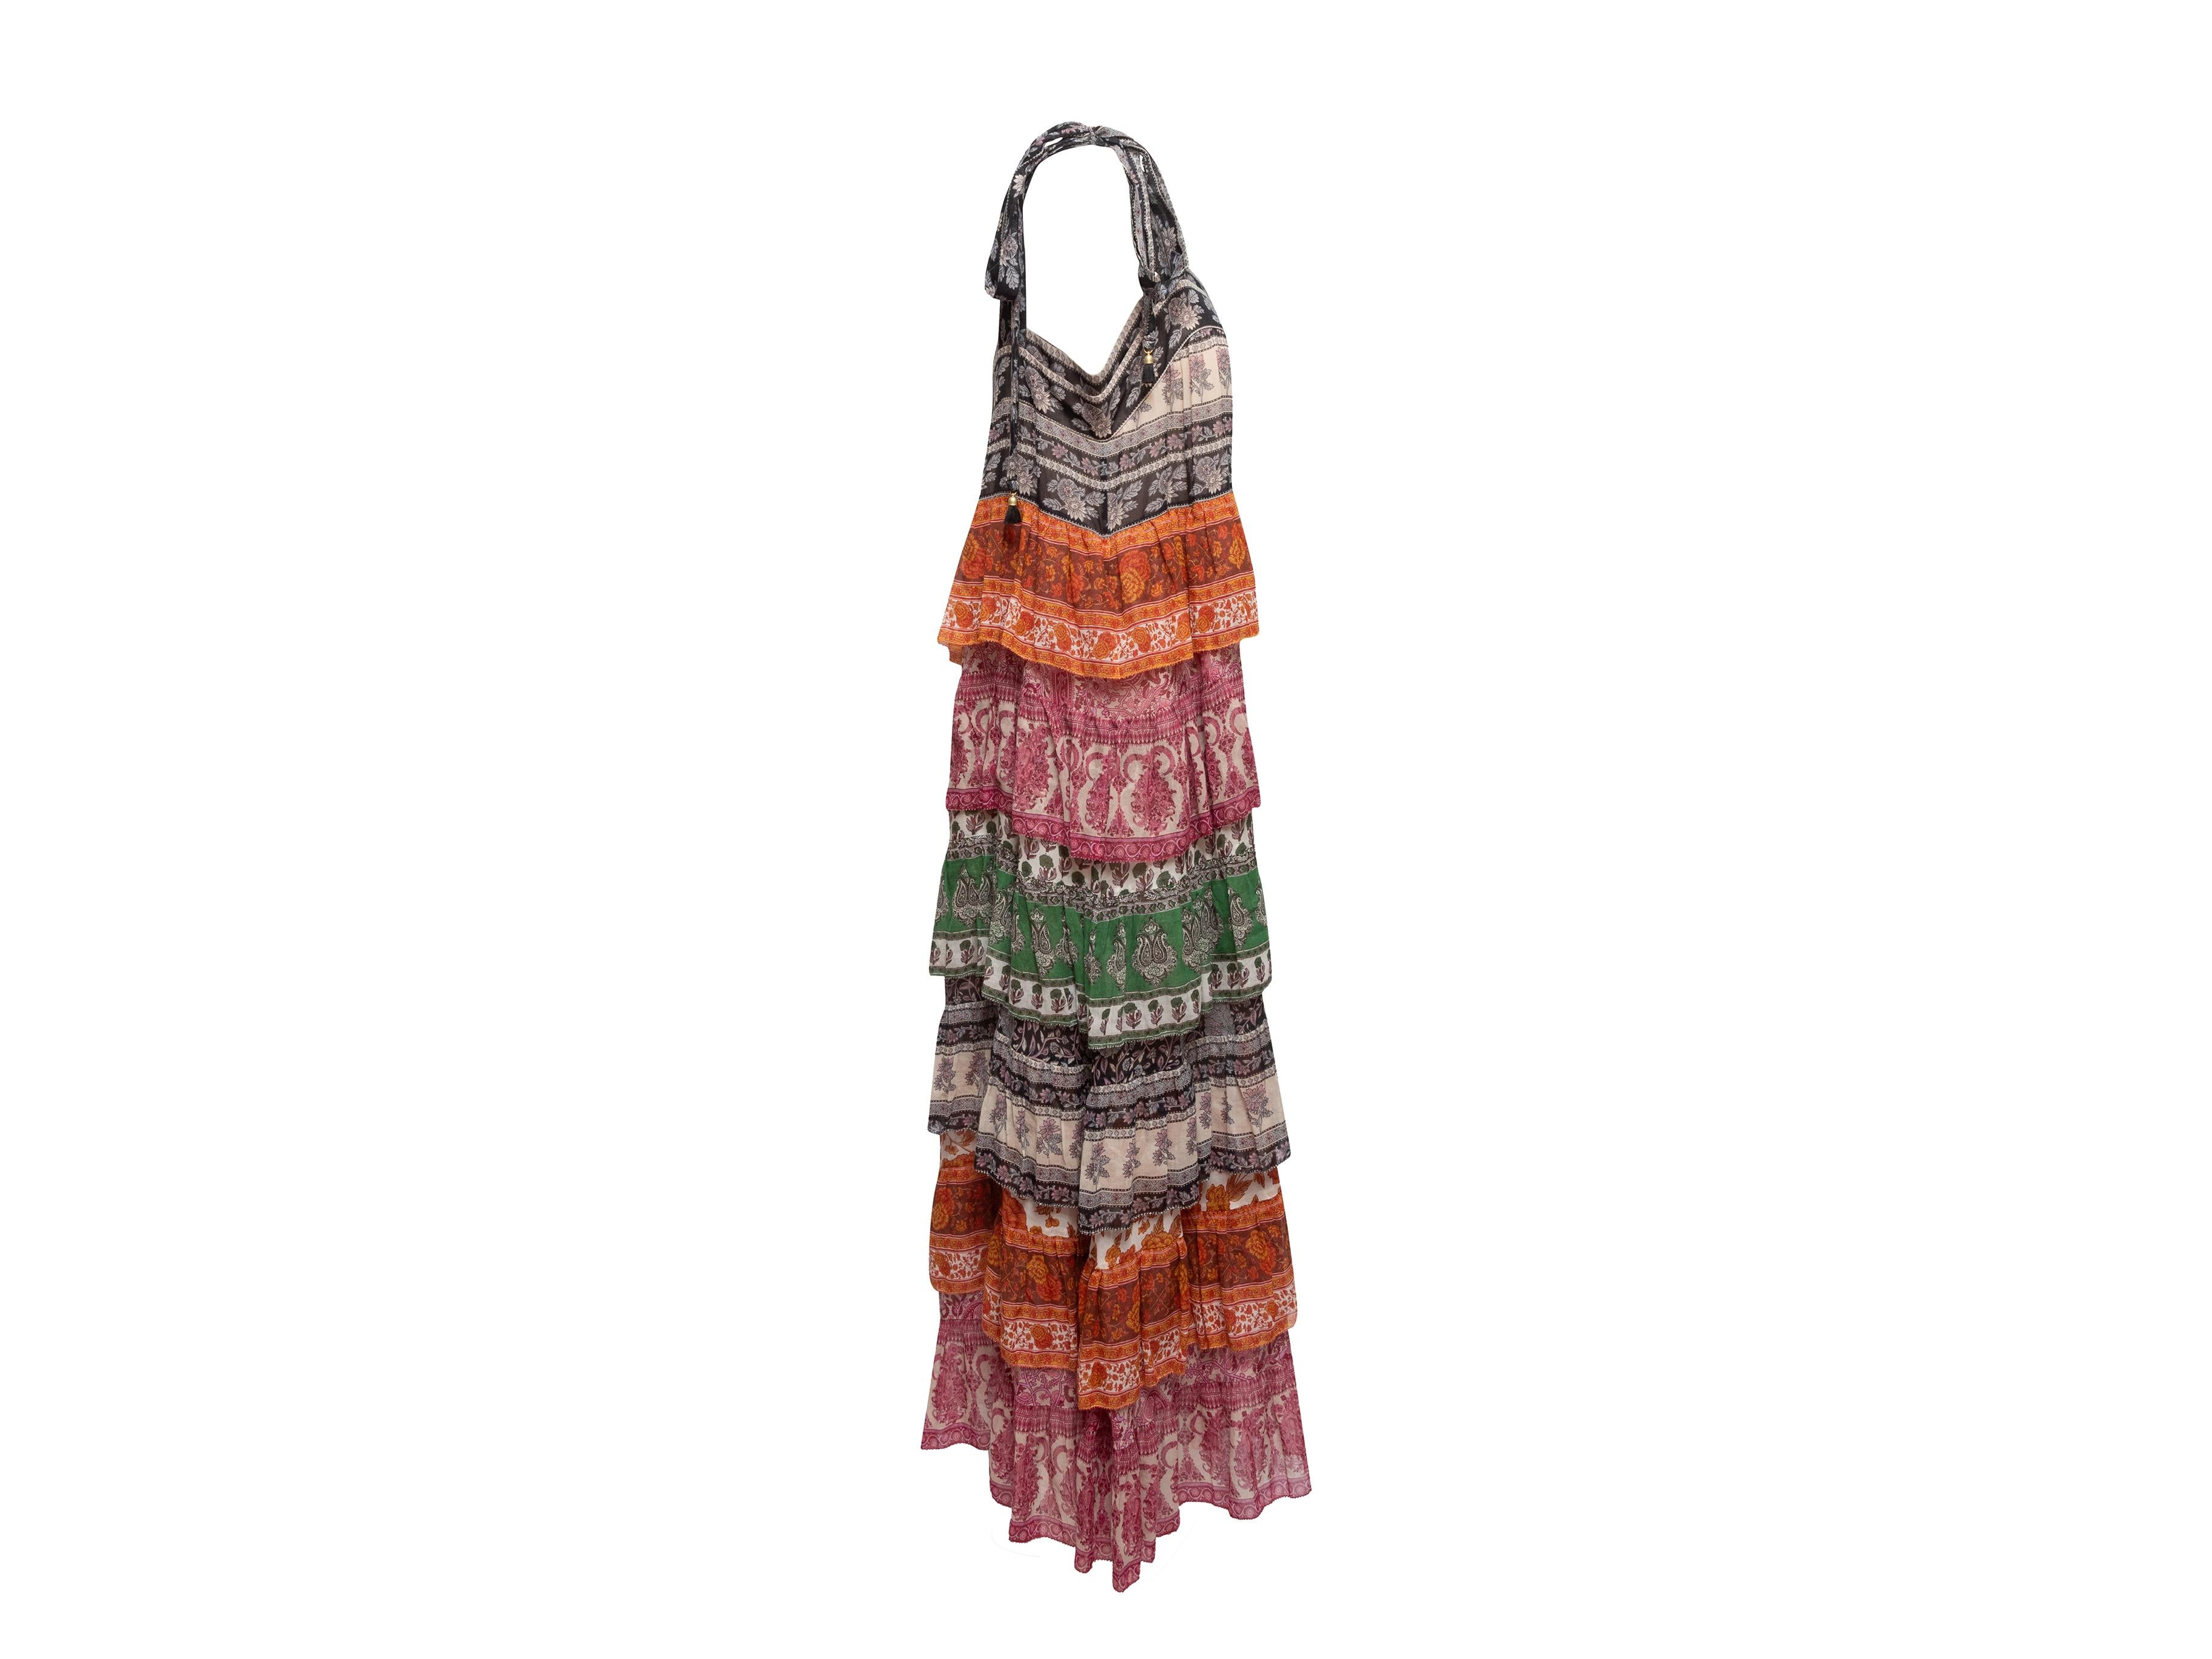 Product Details: Multicolor sleeveless tiered printed maxi dress by Zimmermann. Tie accents at shoulders. Zip closure at back. 36